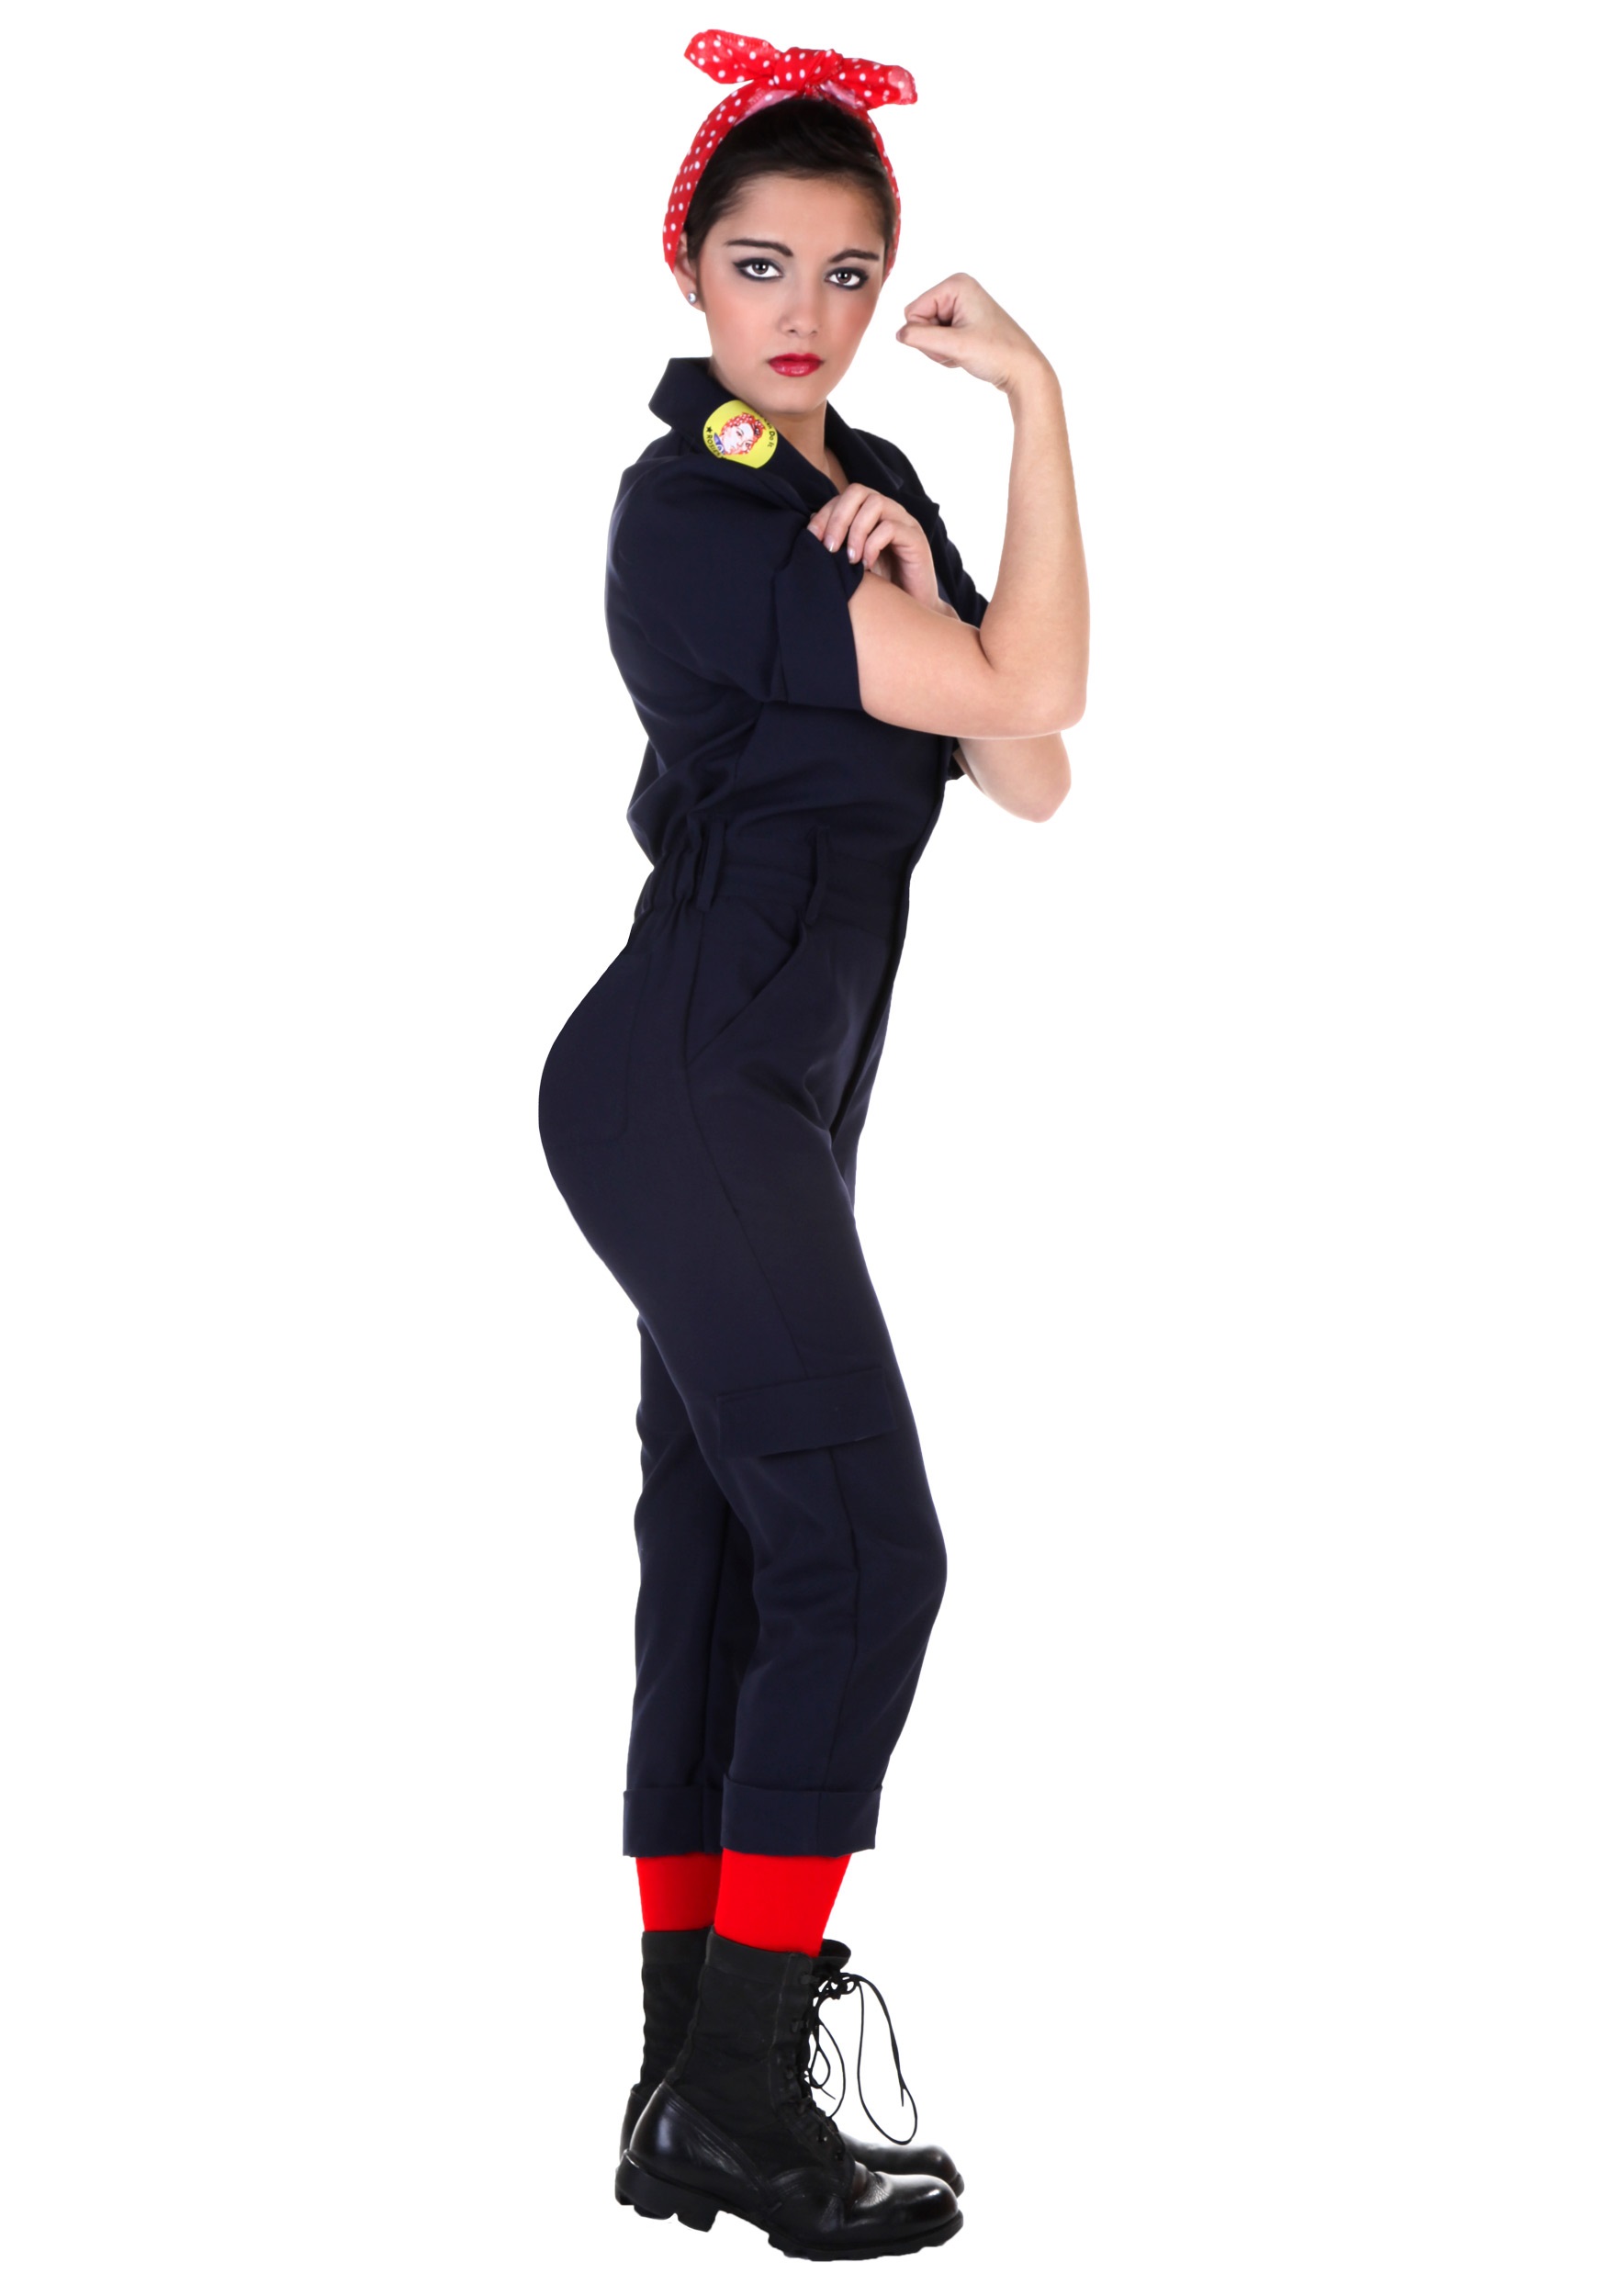 Photos - Fancy Dress FUN Costumes Hardworking Lady Costume for Women Blue/Red FUN2158AD